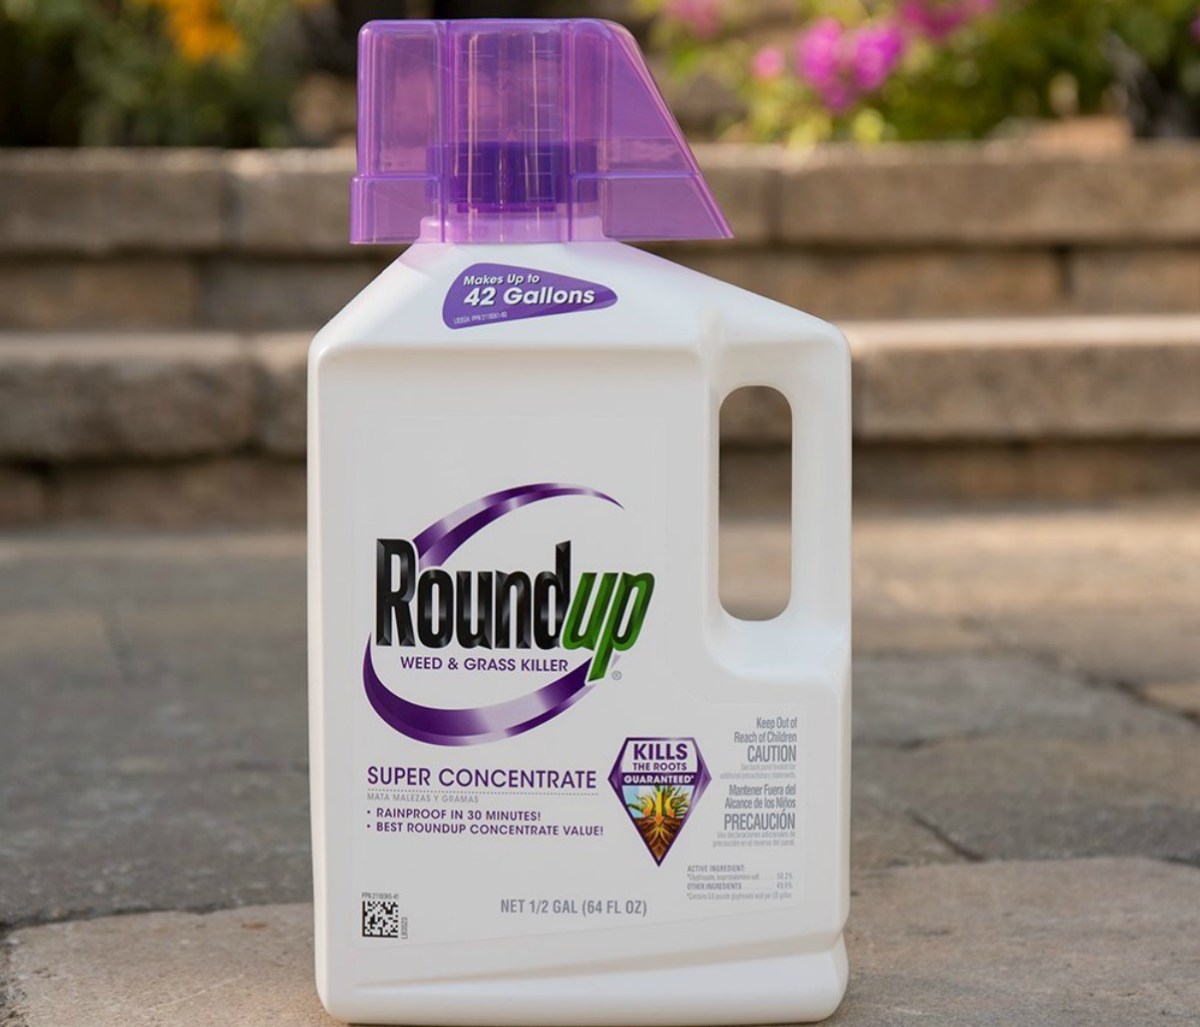 bottle of Roundup Super Concentrate Weed & Grass killer